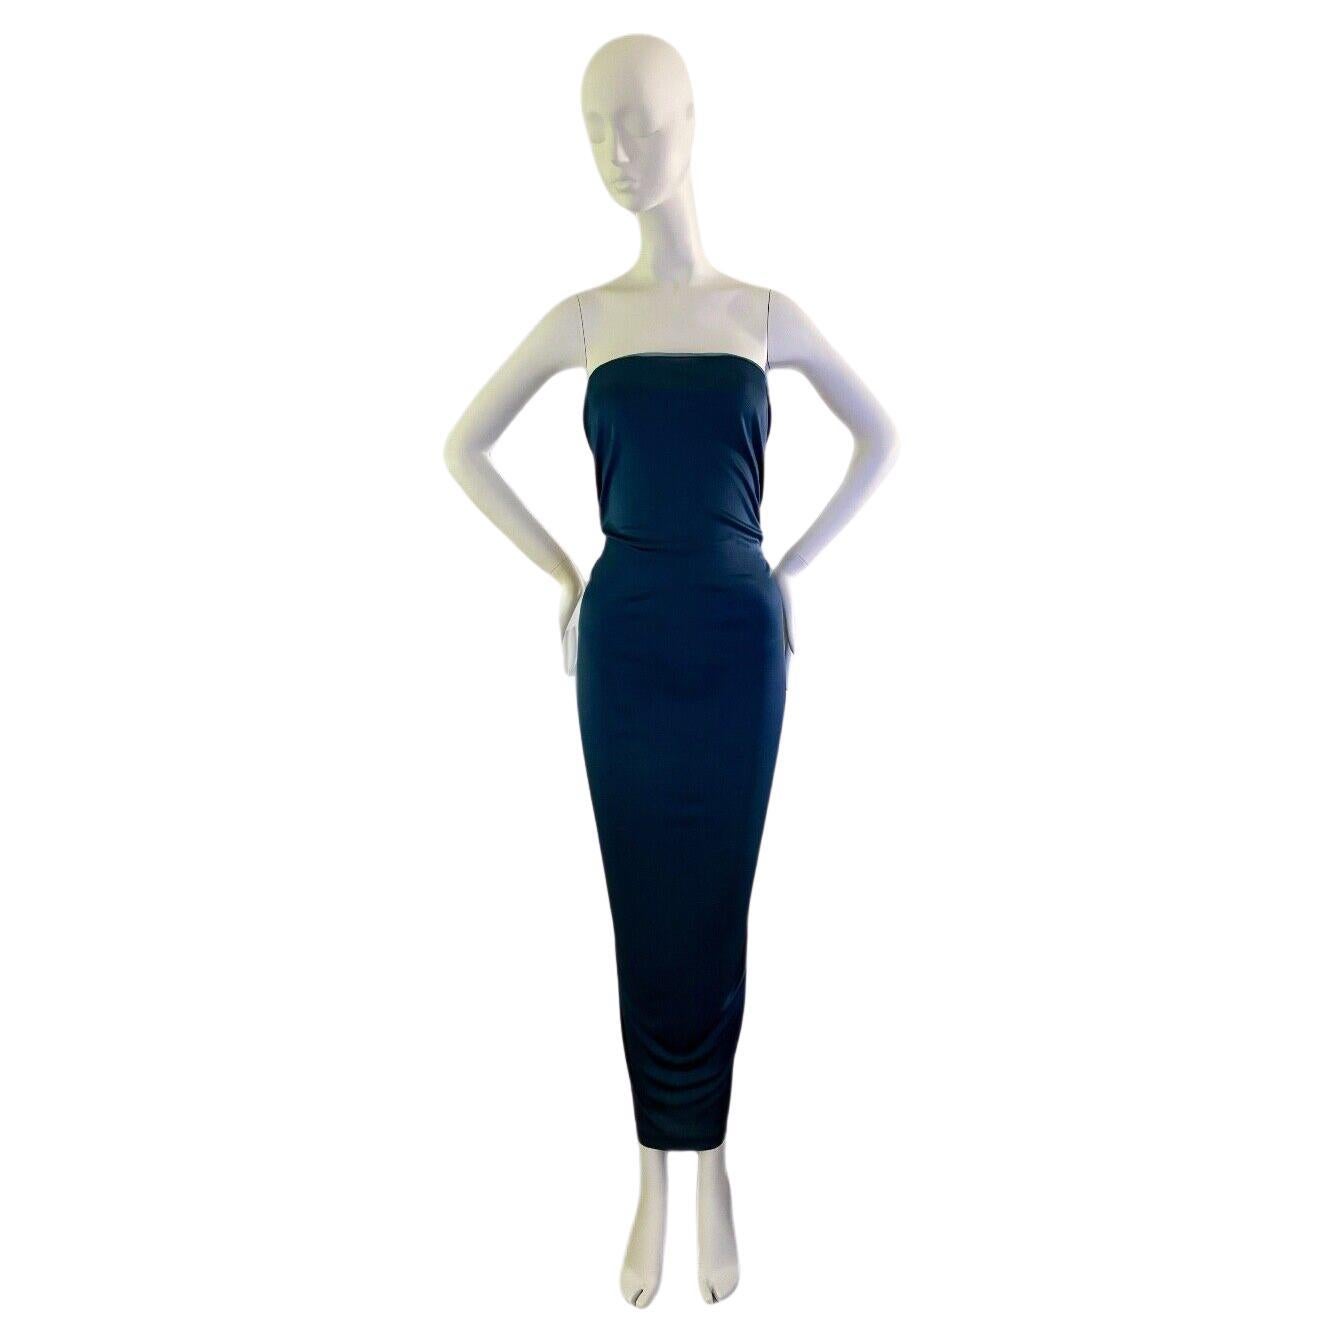 YSL by Tom Ford Rive Gauche Vintage evening gown maxi dress For Sale